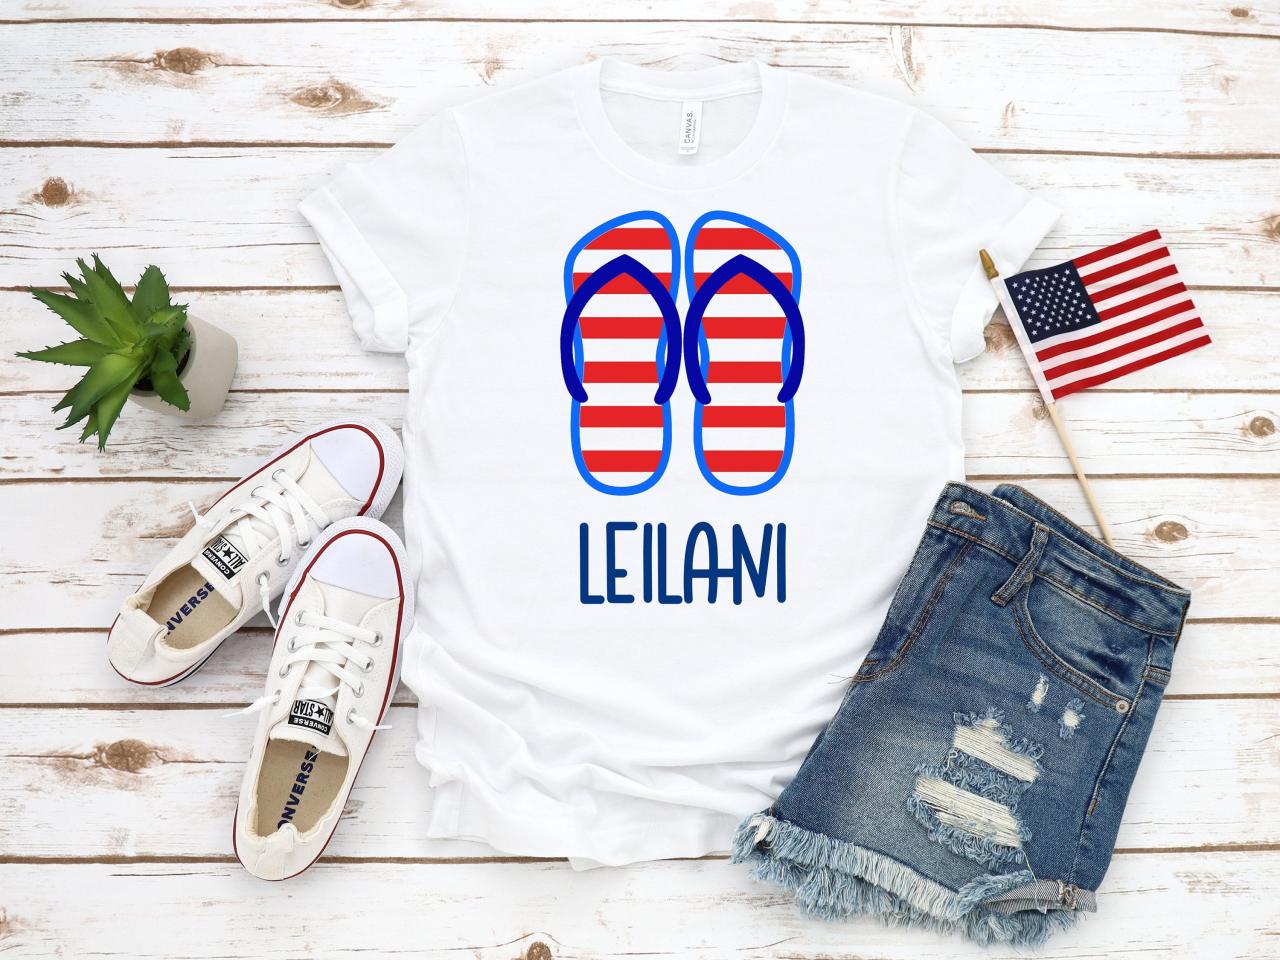 Personalized flip flops. Summer shirts.Independence Day. 4th July shirt. Red White and Blue. July4th. Independence Day. Free shipping